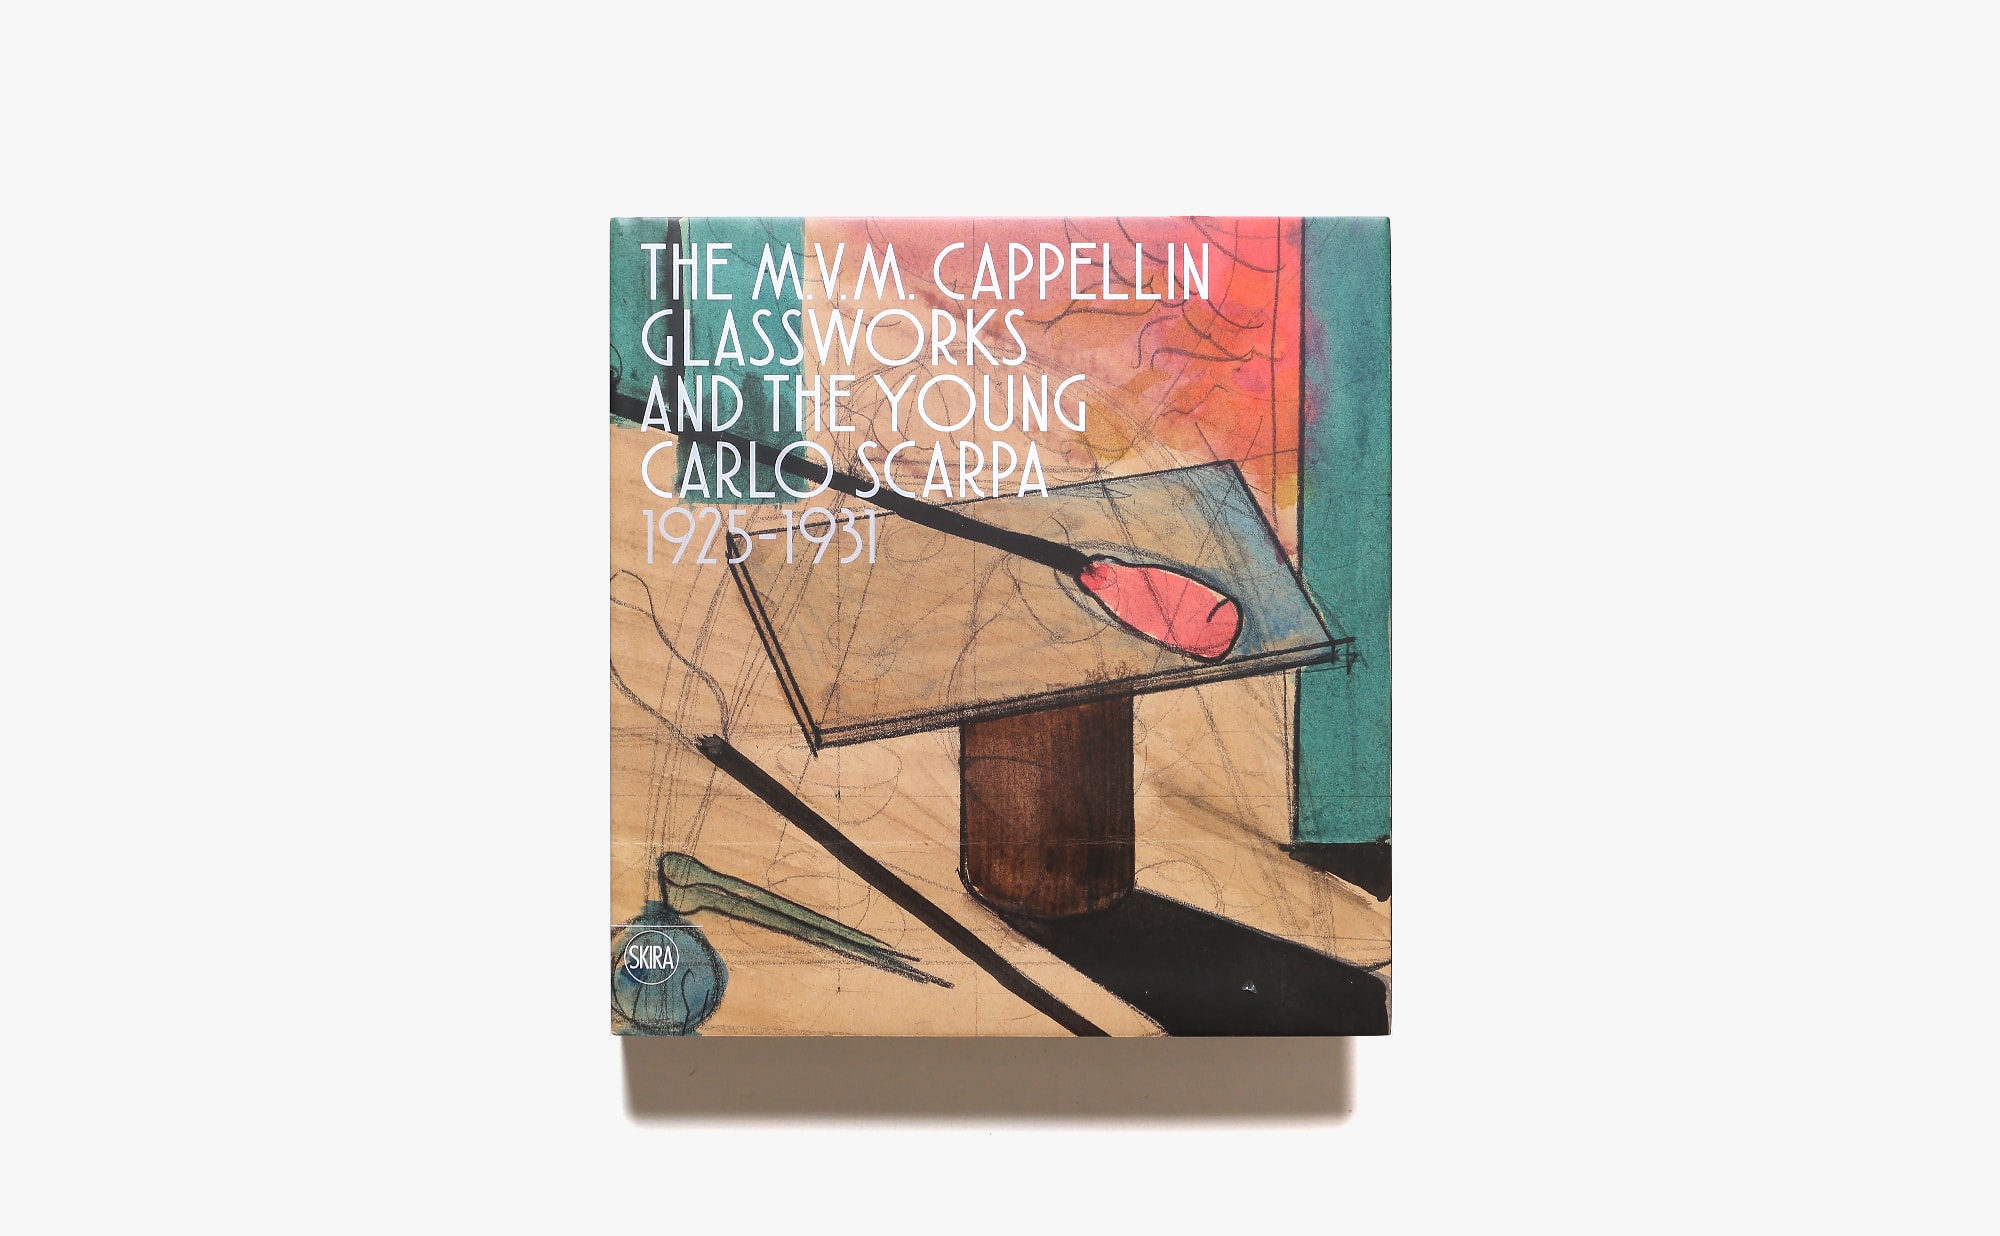 The M.V.M. Cappellin Glassworks and the Young Carlo Scarpa 1925-1931 | カルロ・スカルパ